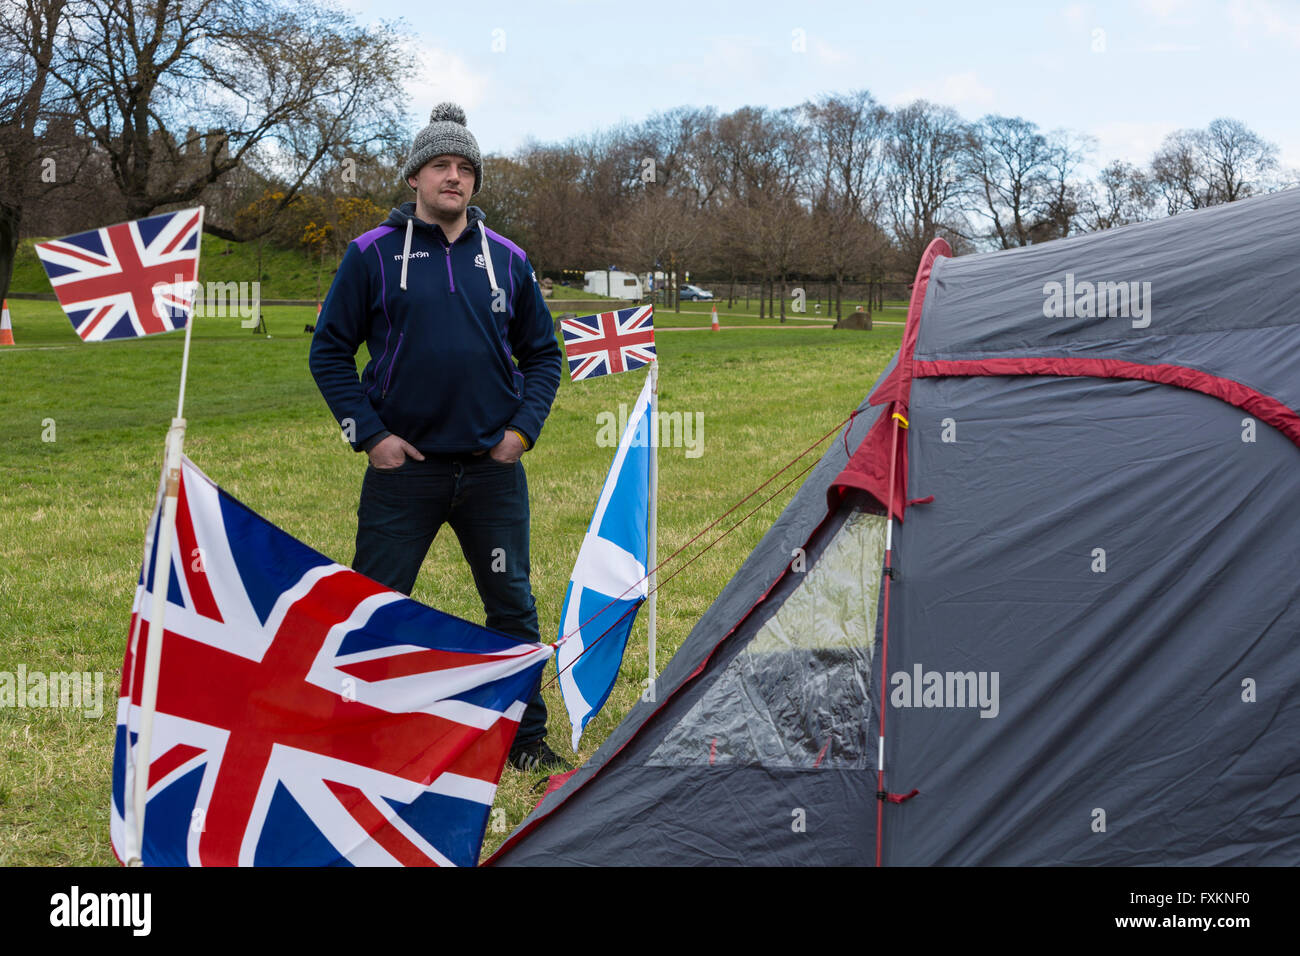 Holyrood Park, Edinburgh, Scotland. 16th April, 2016. Neil Tannahill and James Woodward have set up a rival camp to the Indy Camp in Holyrood Park. They are Unionists wanting to raise awareness  that Scotland voted No in the referendum. James commented "We are inn danger of people forgetting the No Vote and we want to remind people we are still here". The camp will be in Holyrood Park for the weekend of 16-17 April with a larger scale demonstration planned for the Saturday evening. Credit:  Richard Dyson/Alamy Live News Stock Photo